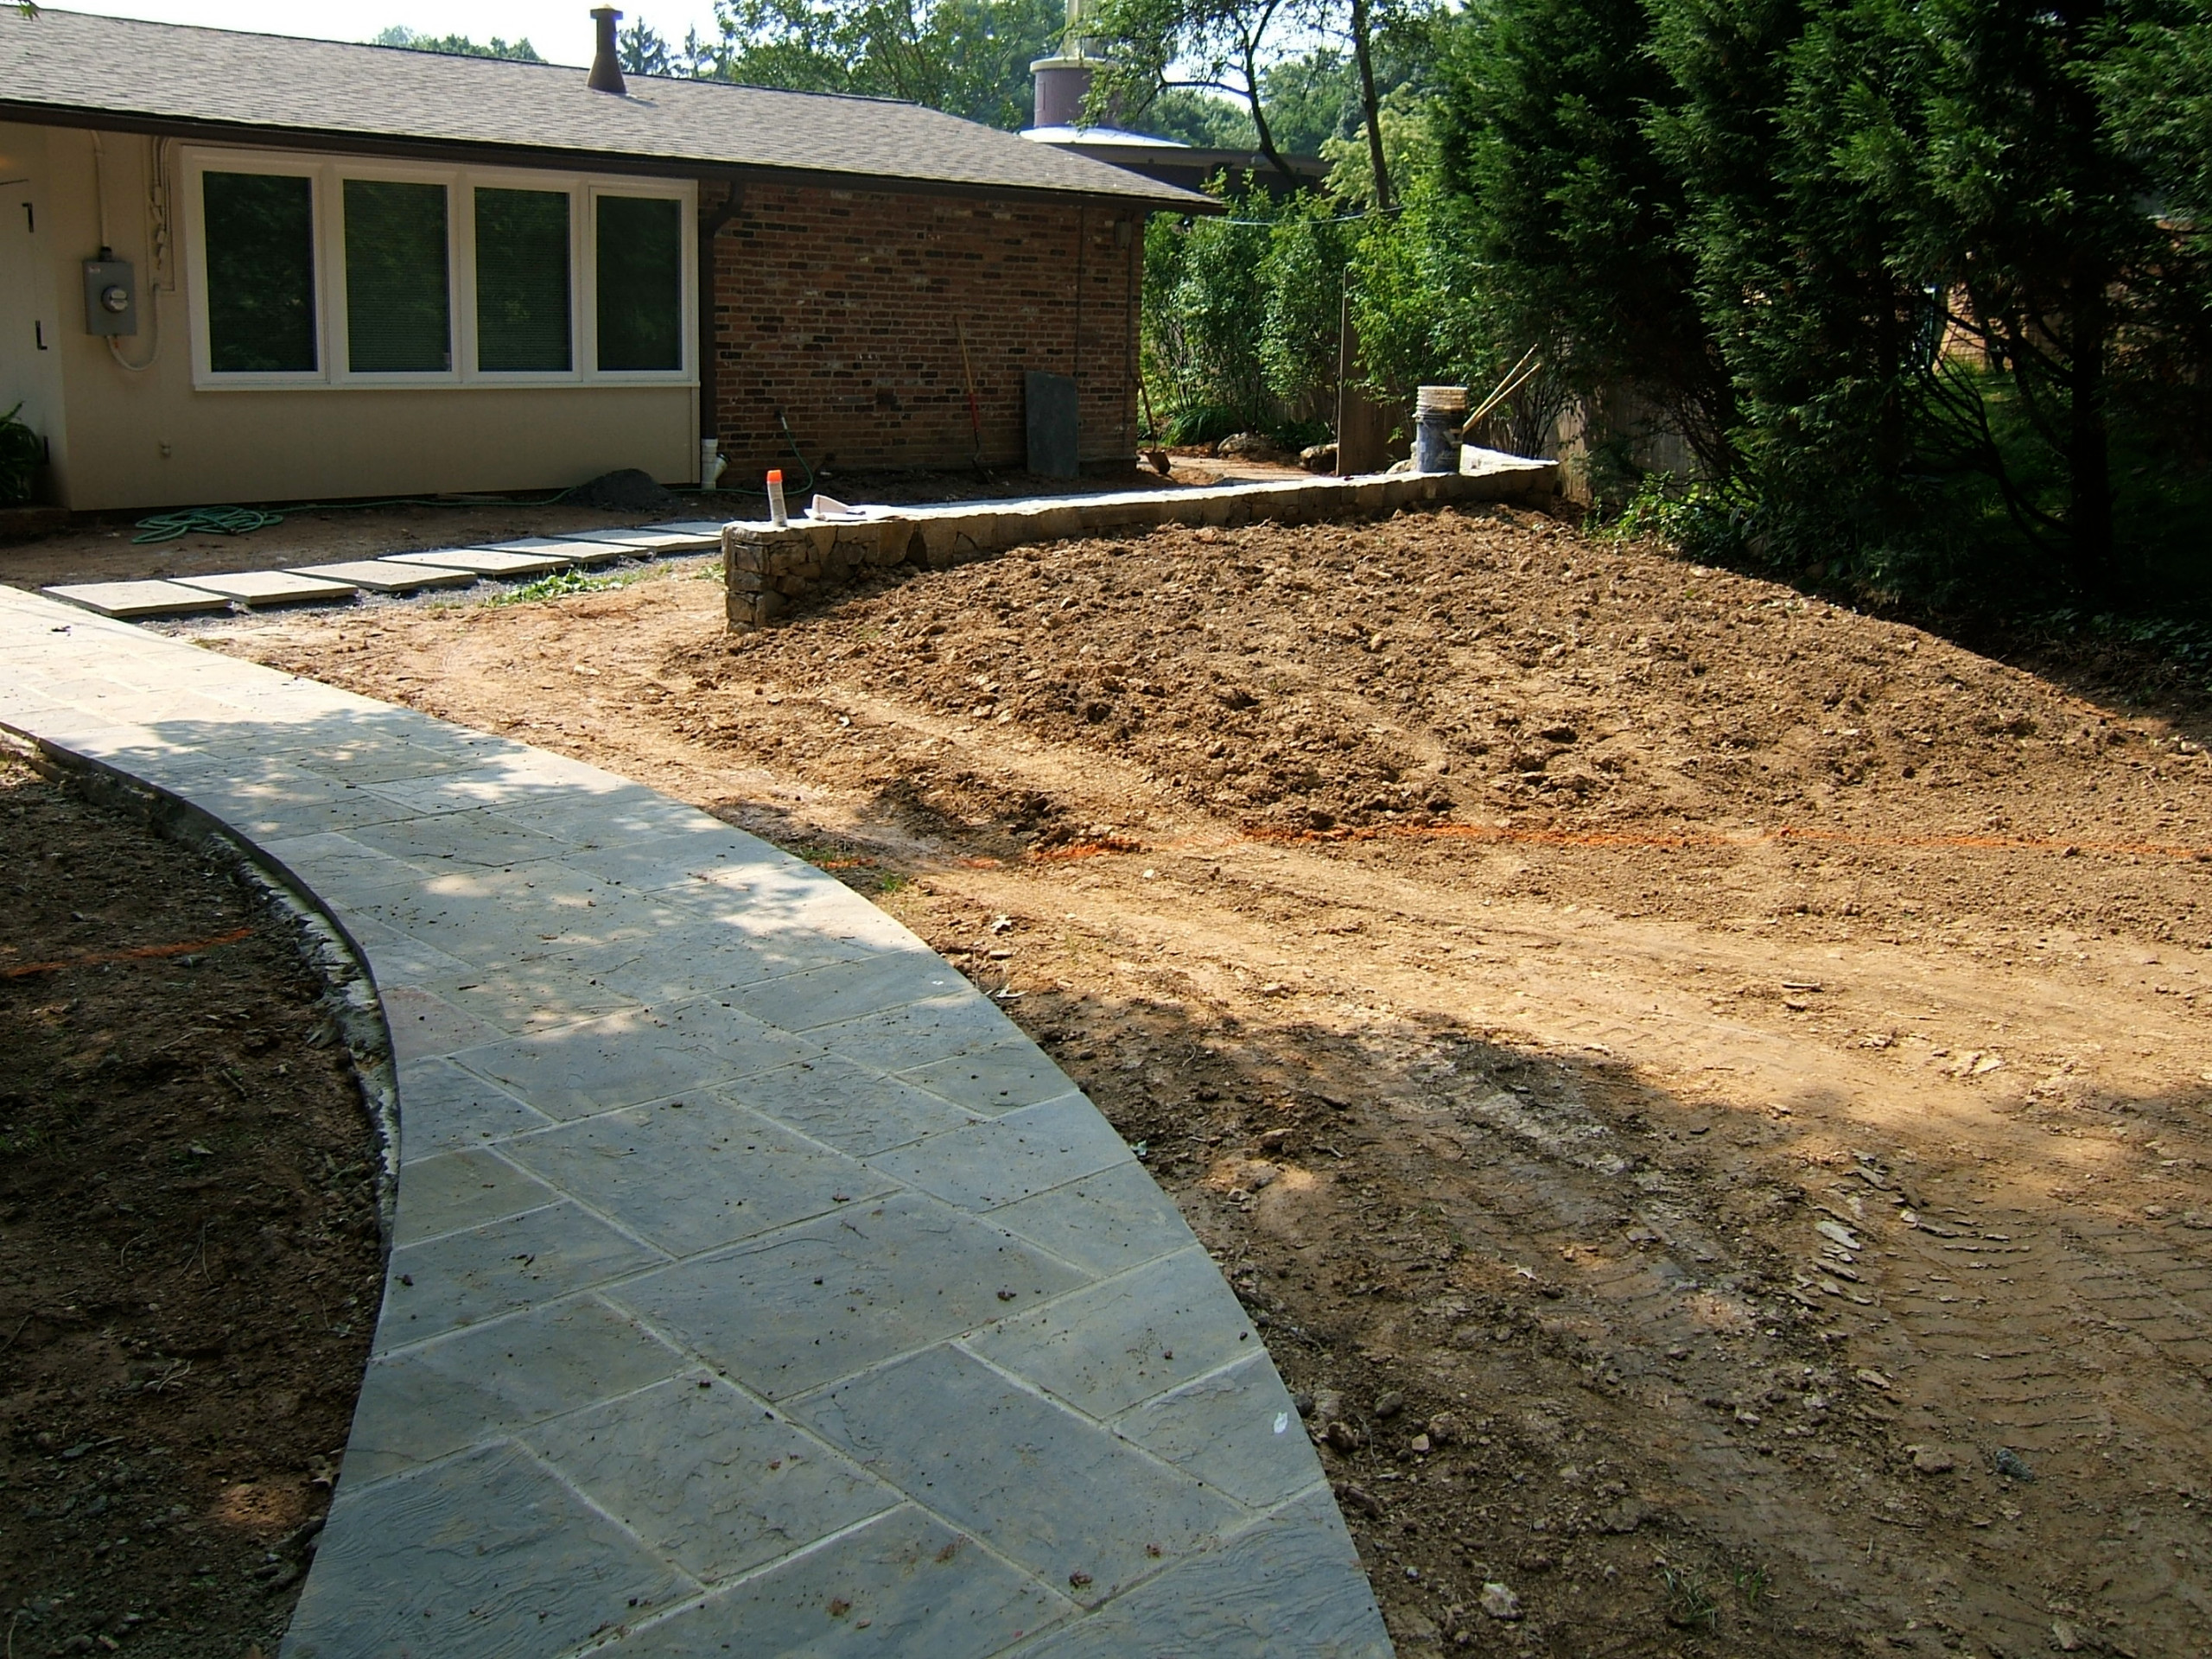 Curved lead walk, path to walled patio with privacy bern